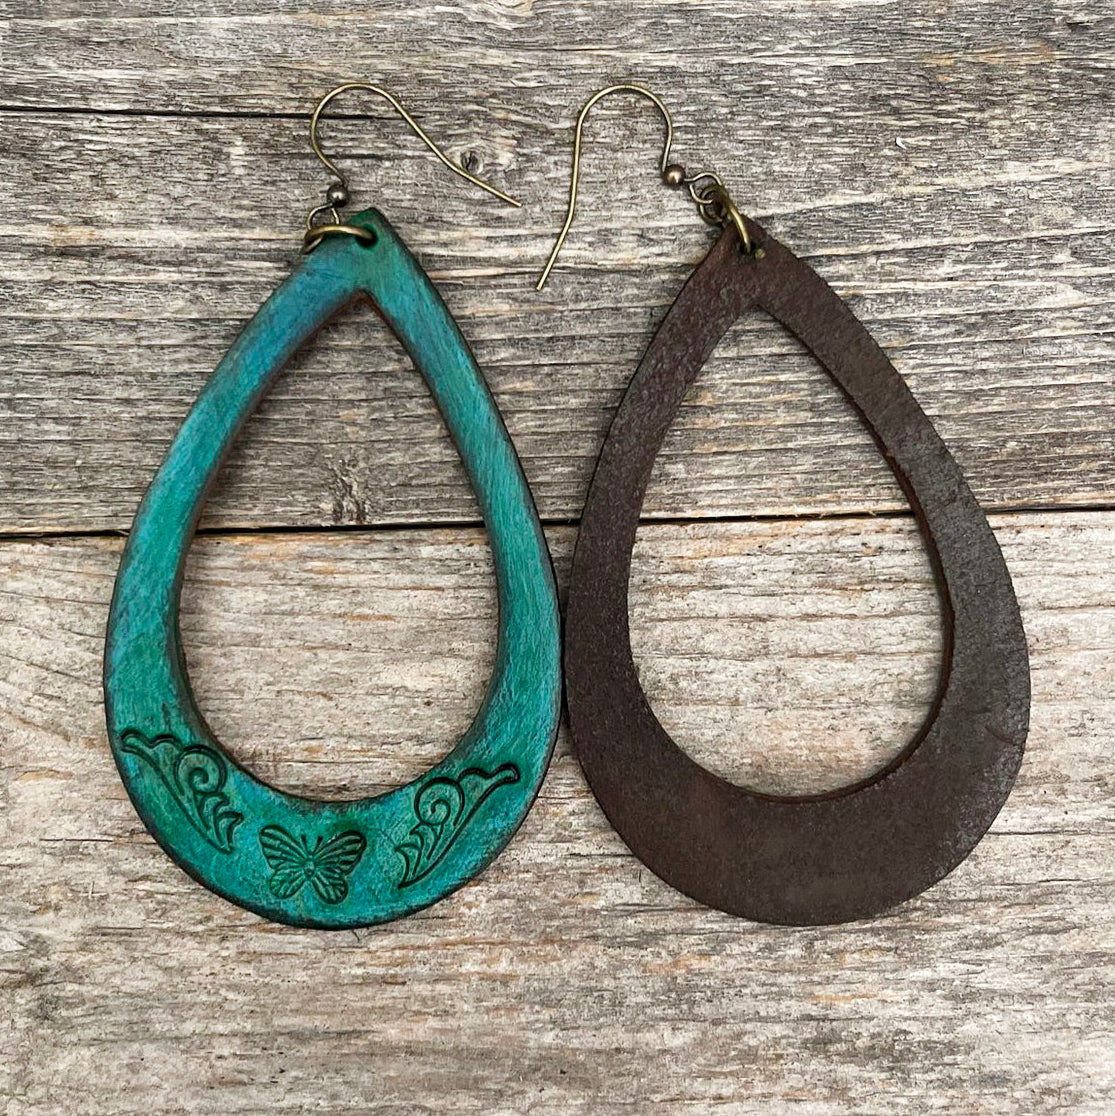 One of a Kind dark turquoise drop leather earrings